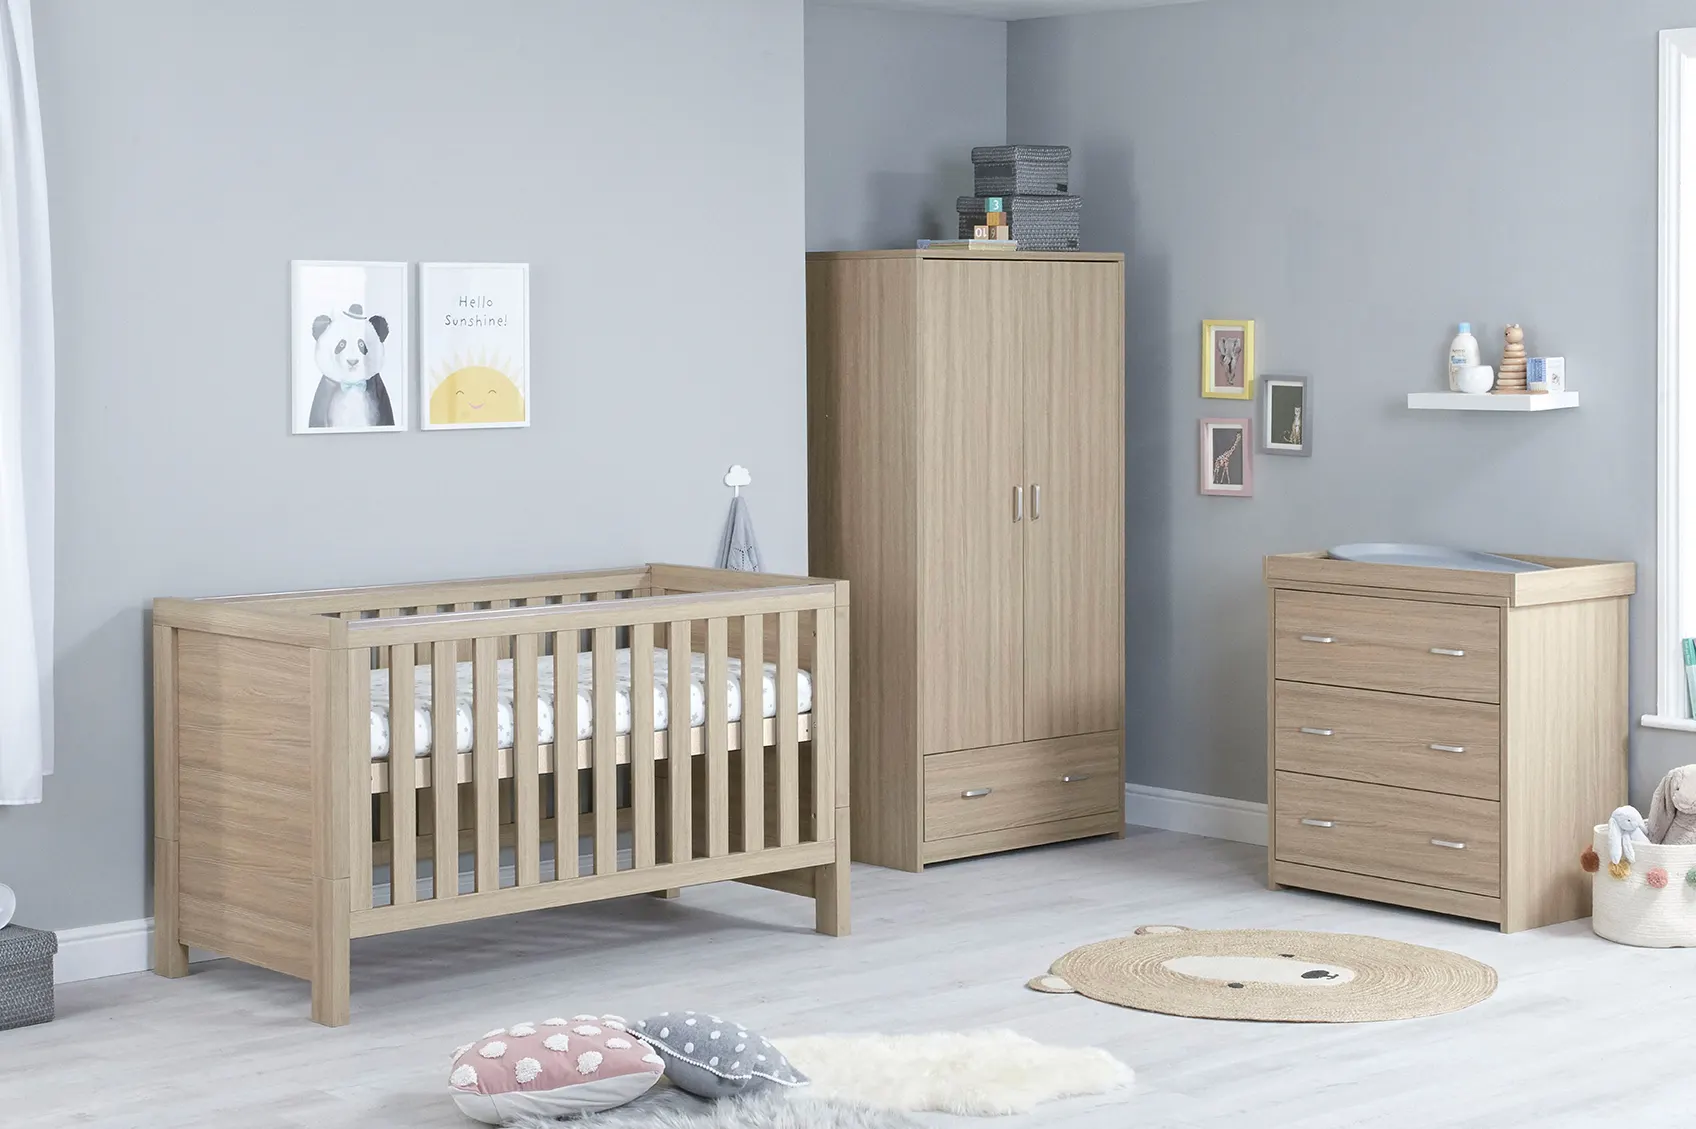 You are currently viewing Are You Looking For Beautiful Furniture For Your Nursery?